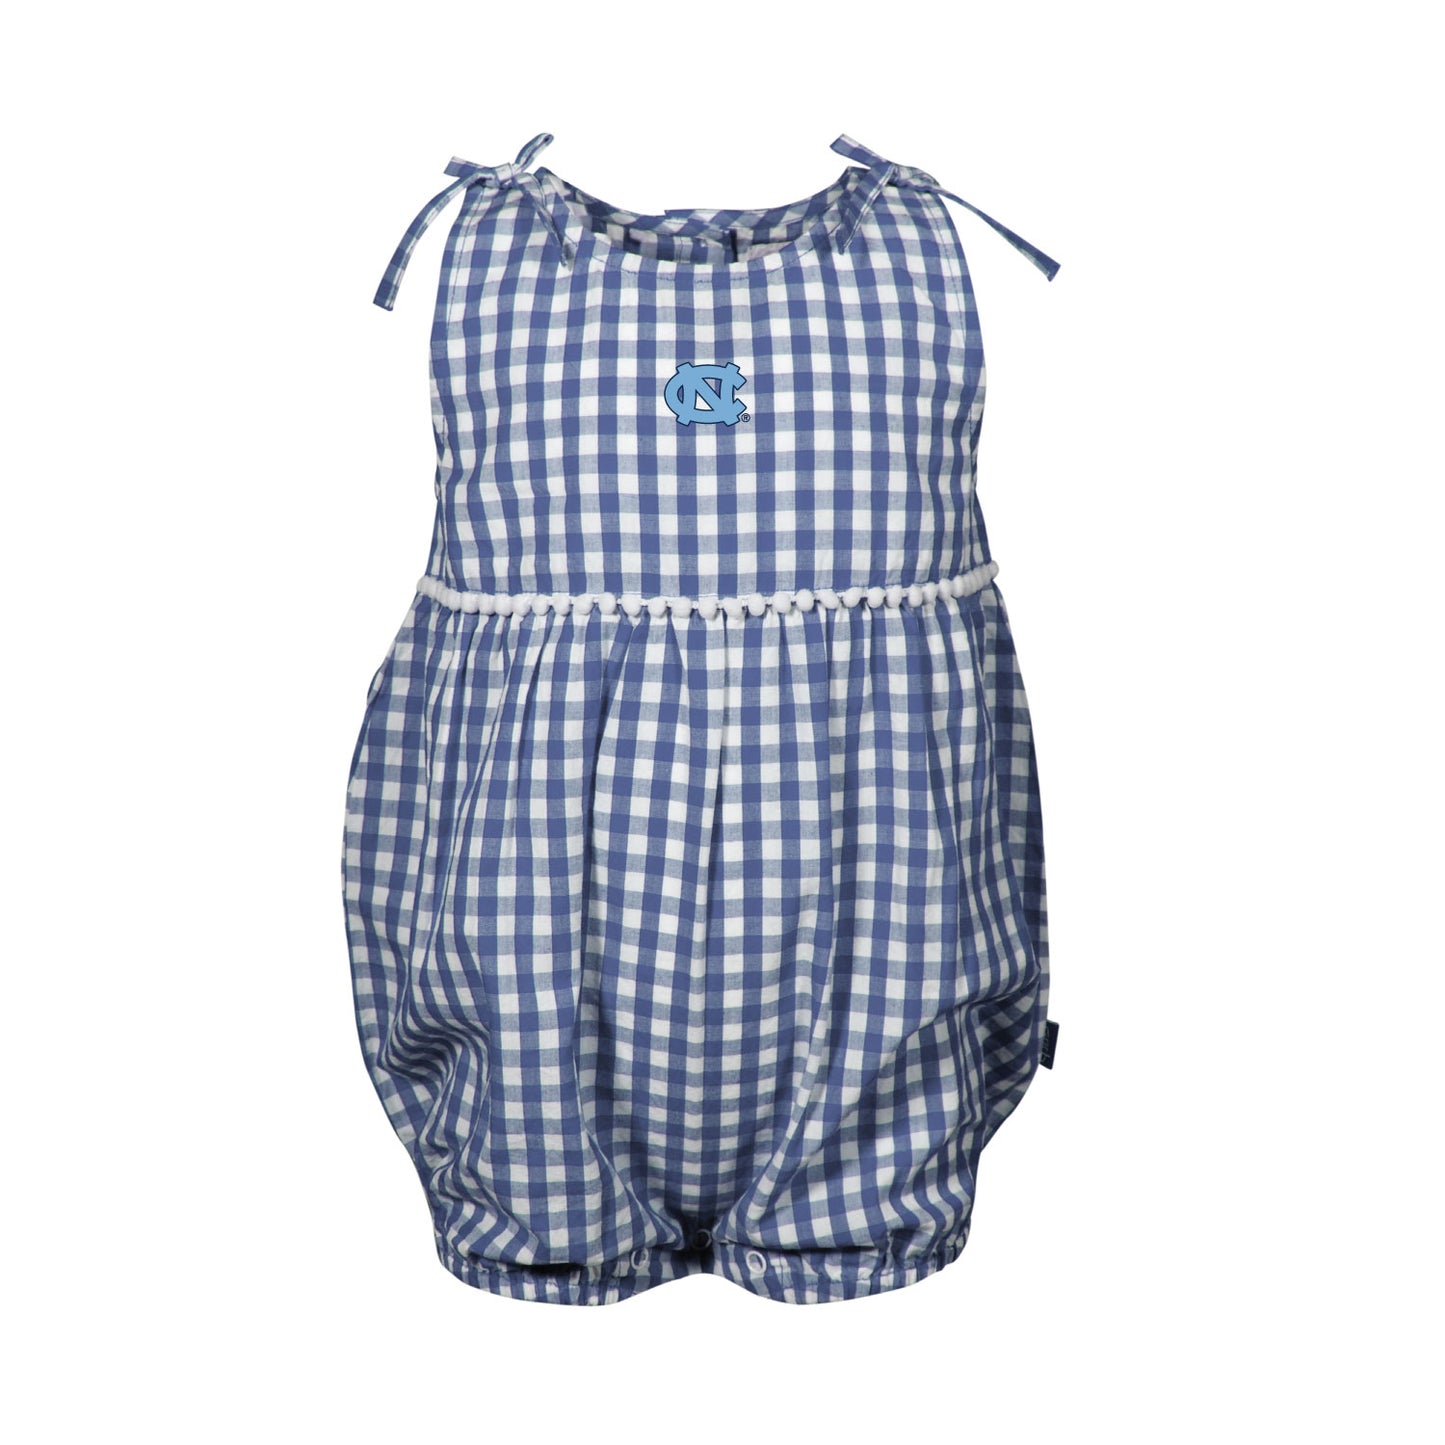 North Carolina Tar Heels Baby Onesie with Gingham Blue Pattern and UNC Logo